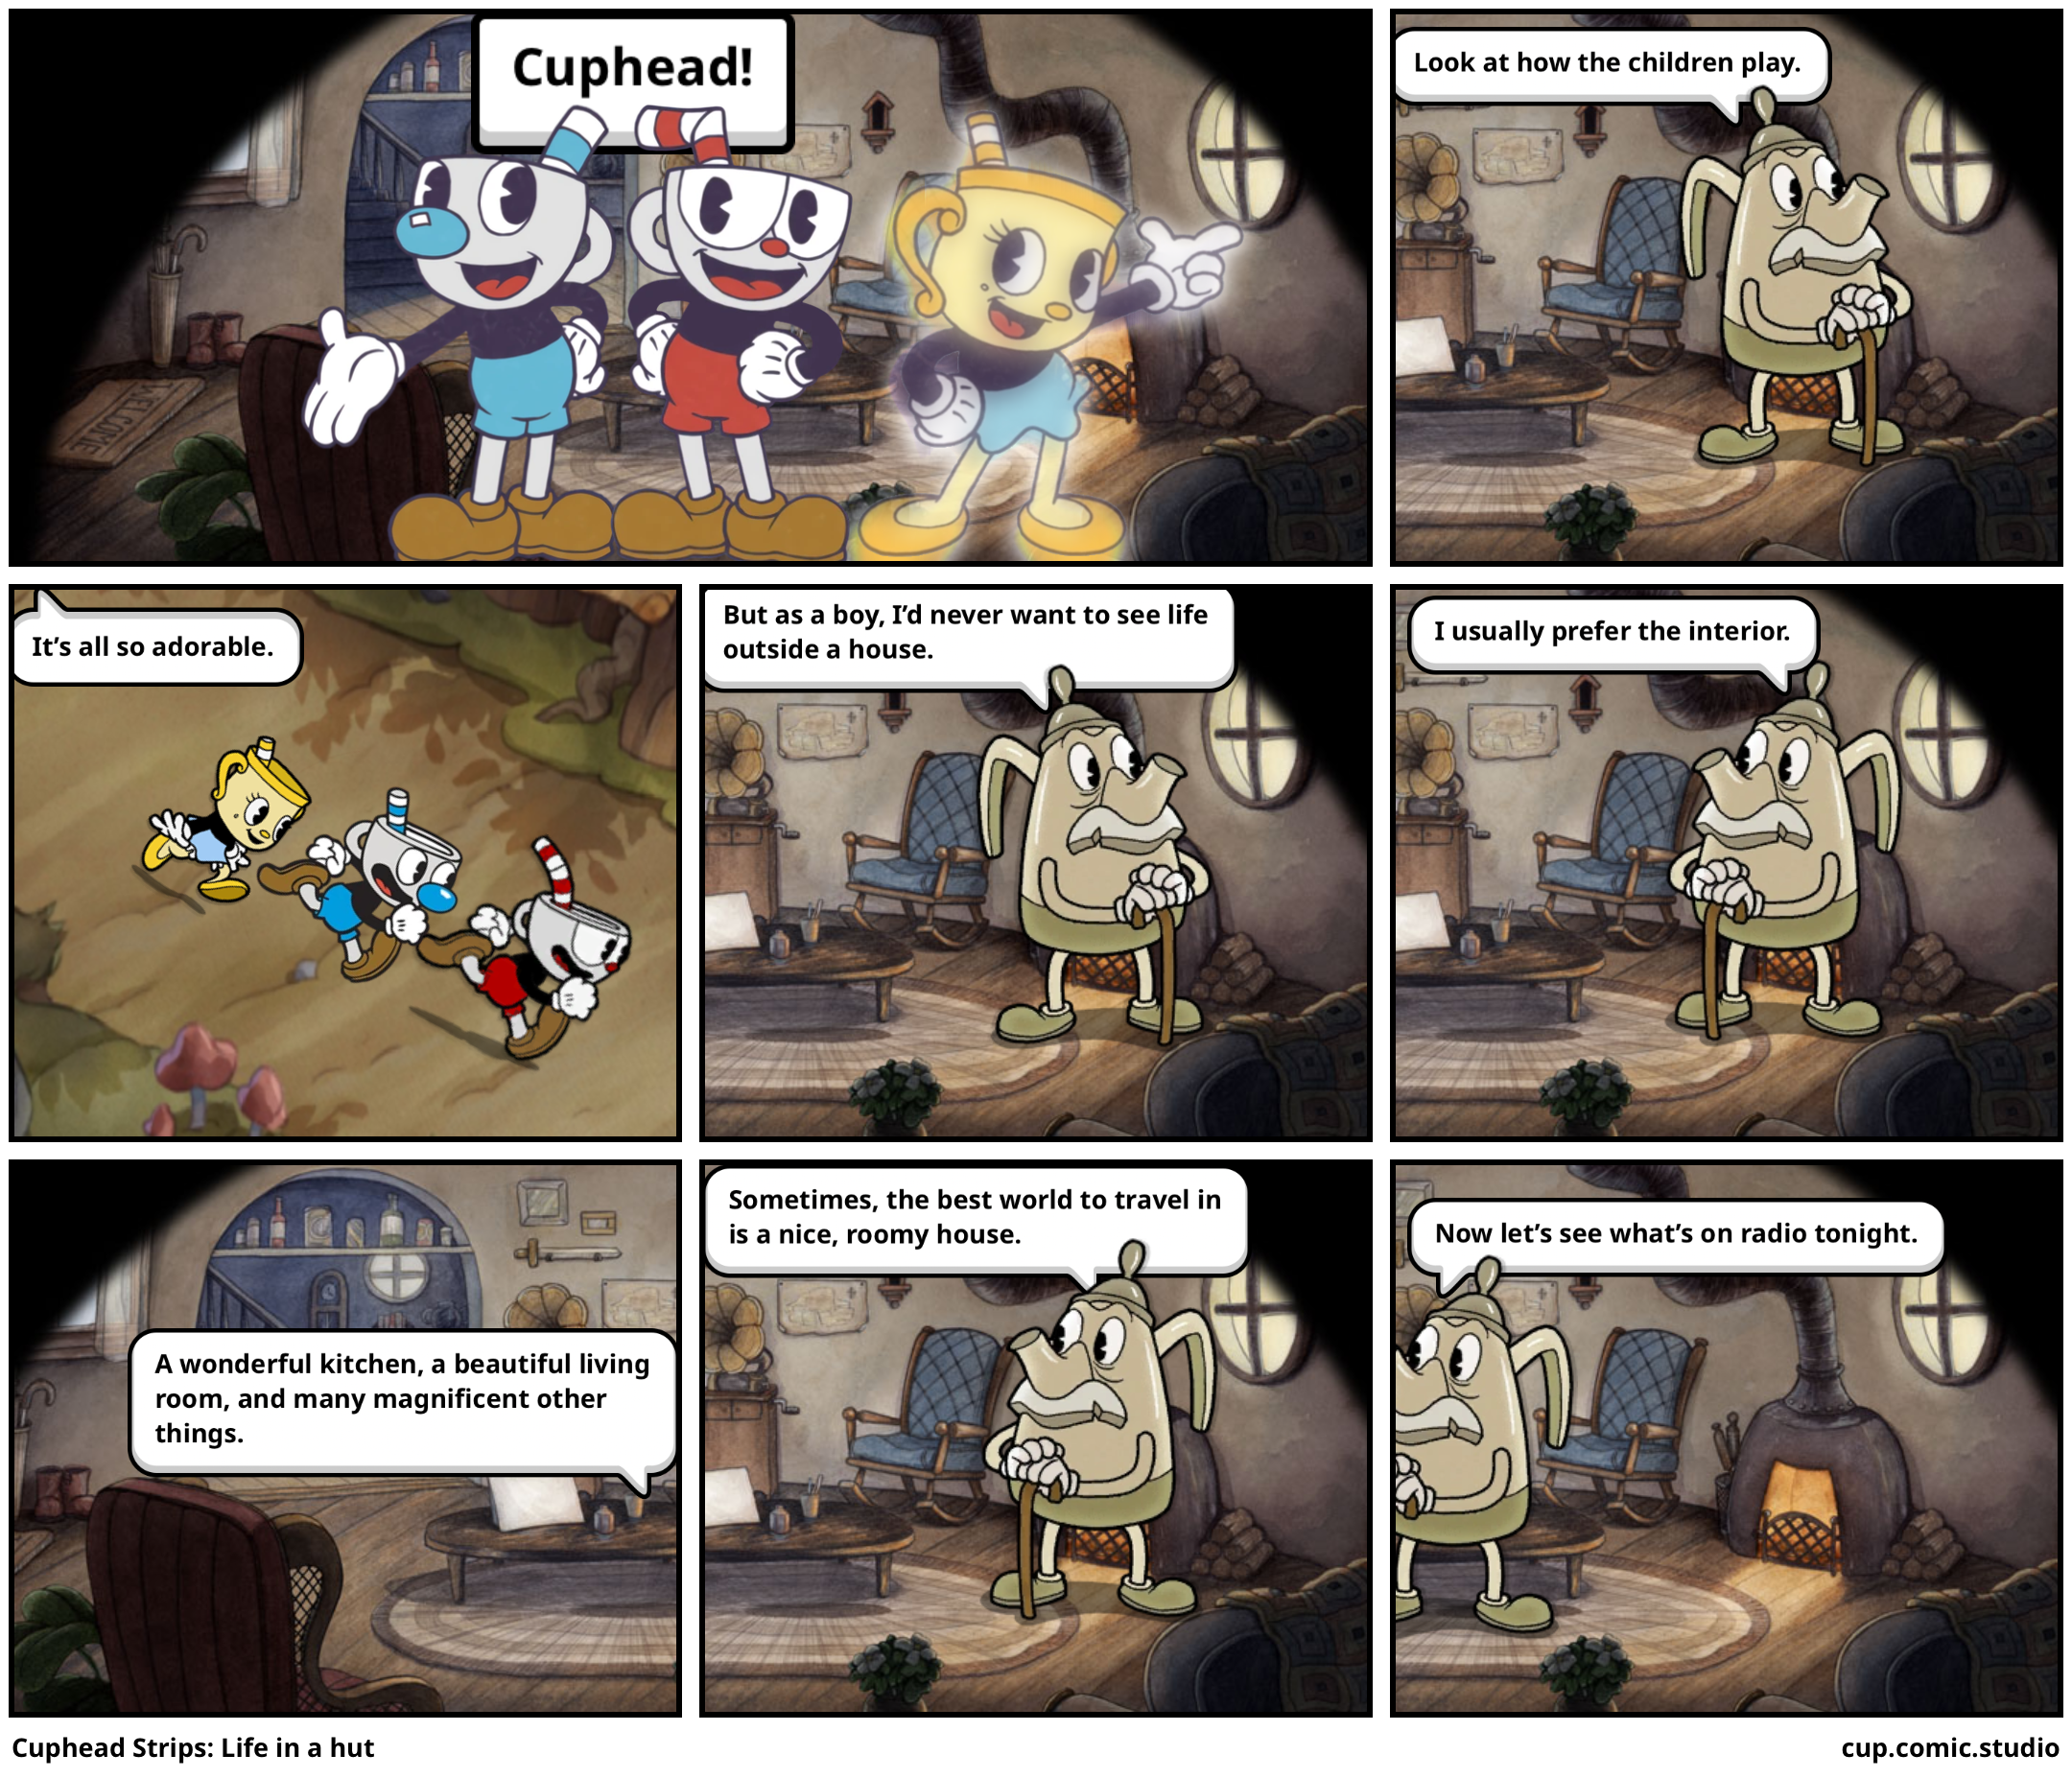 Cuphead Strips: Life in a hut